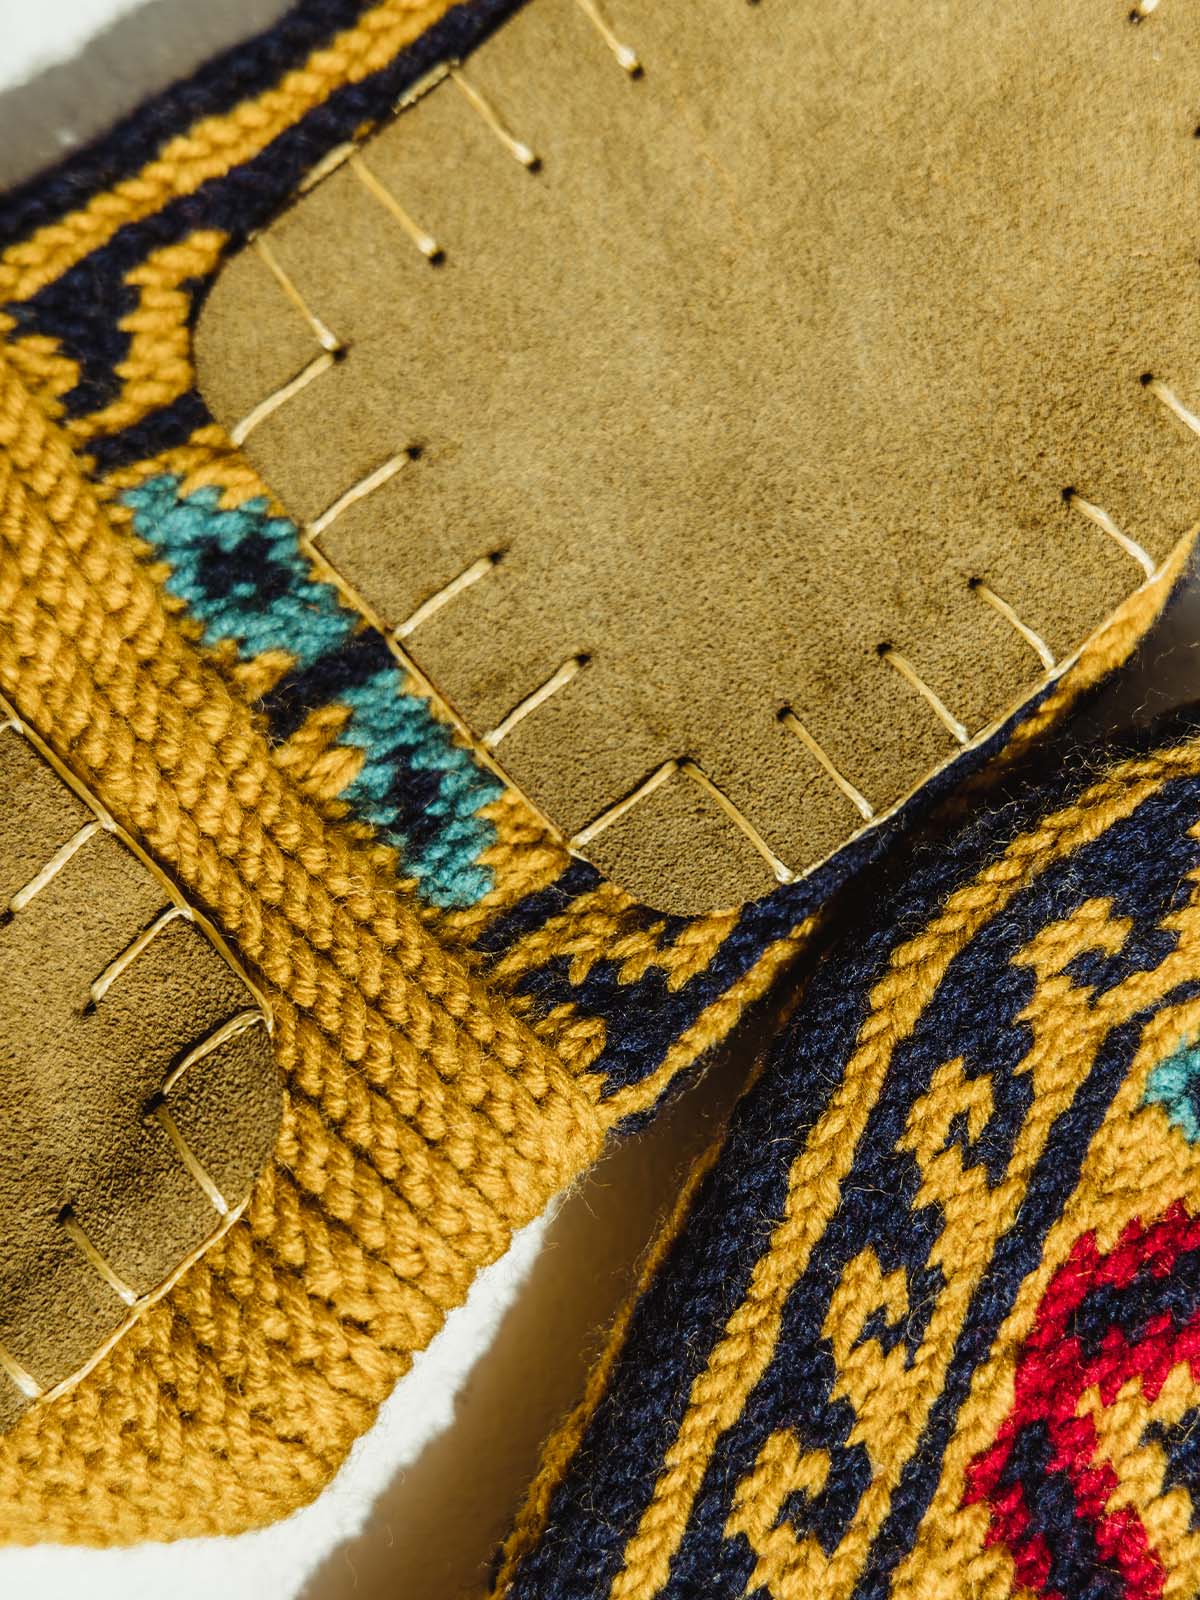 Bottom of golden yellow/mustard colored shoe/socks. Featuring  padding on the bottom much like a house shoe.  Material is tope in color and hand stitched to the sock.